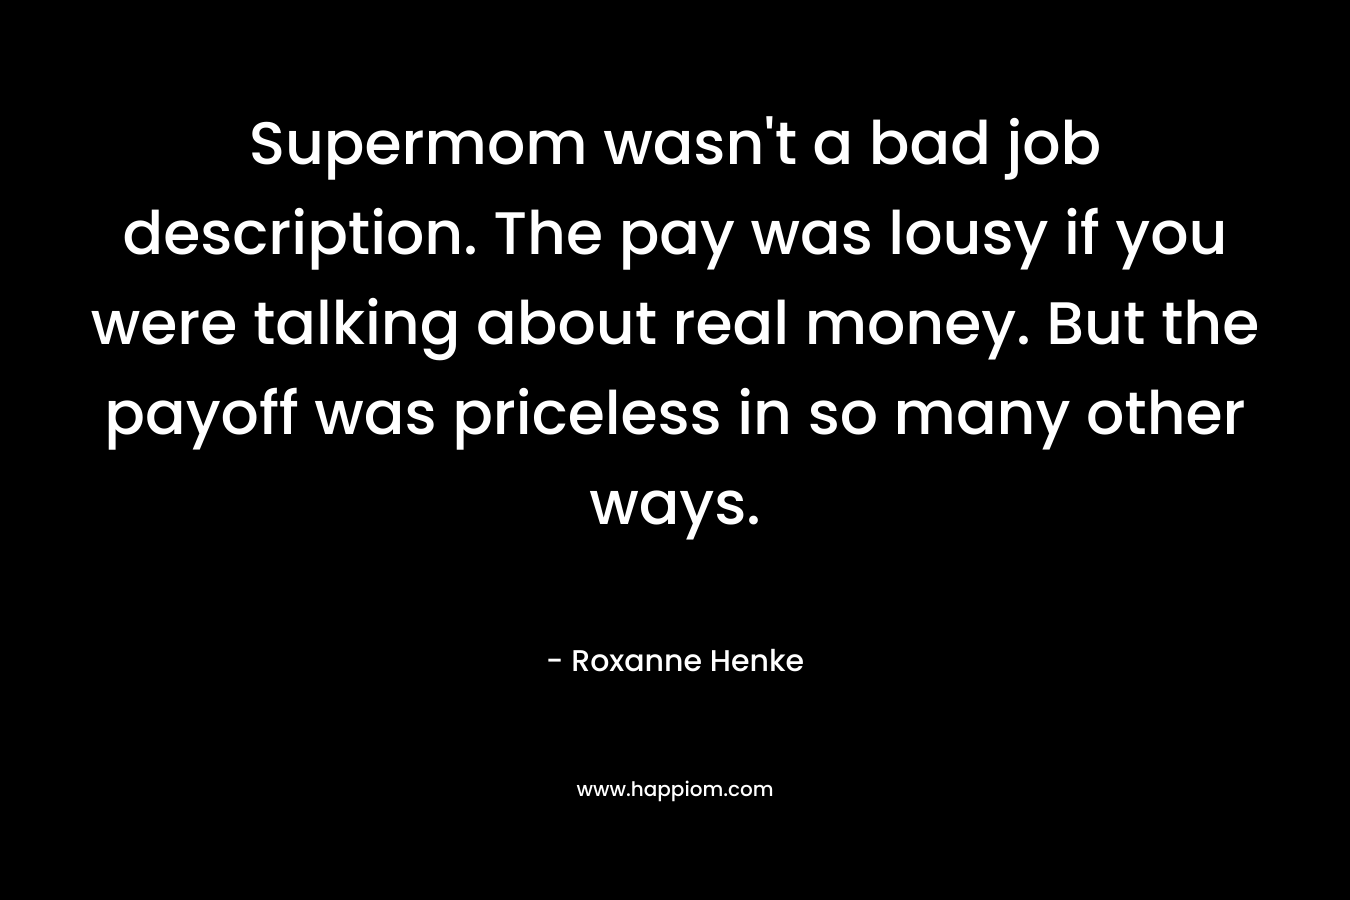 Supermom wasn’t a bad job description. The pay was lousy if you were talking about real money. But the payoff was priceless in so many other ways. – Roxanne Henke